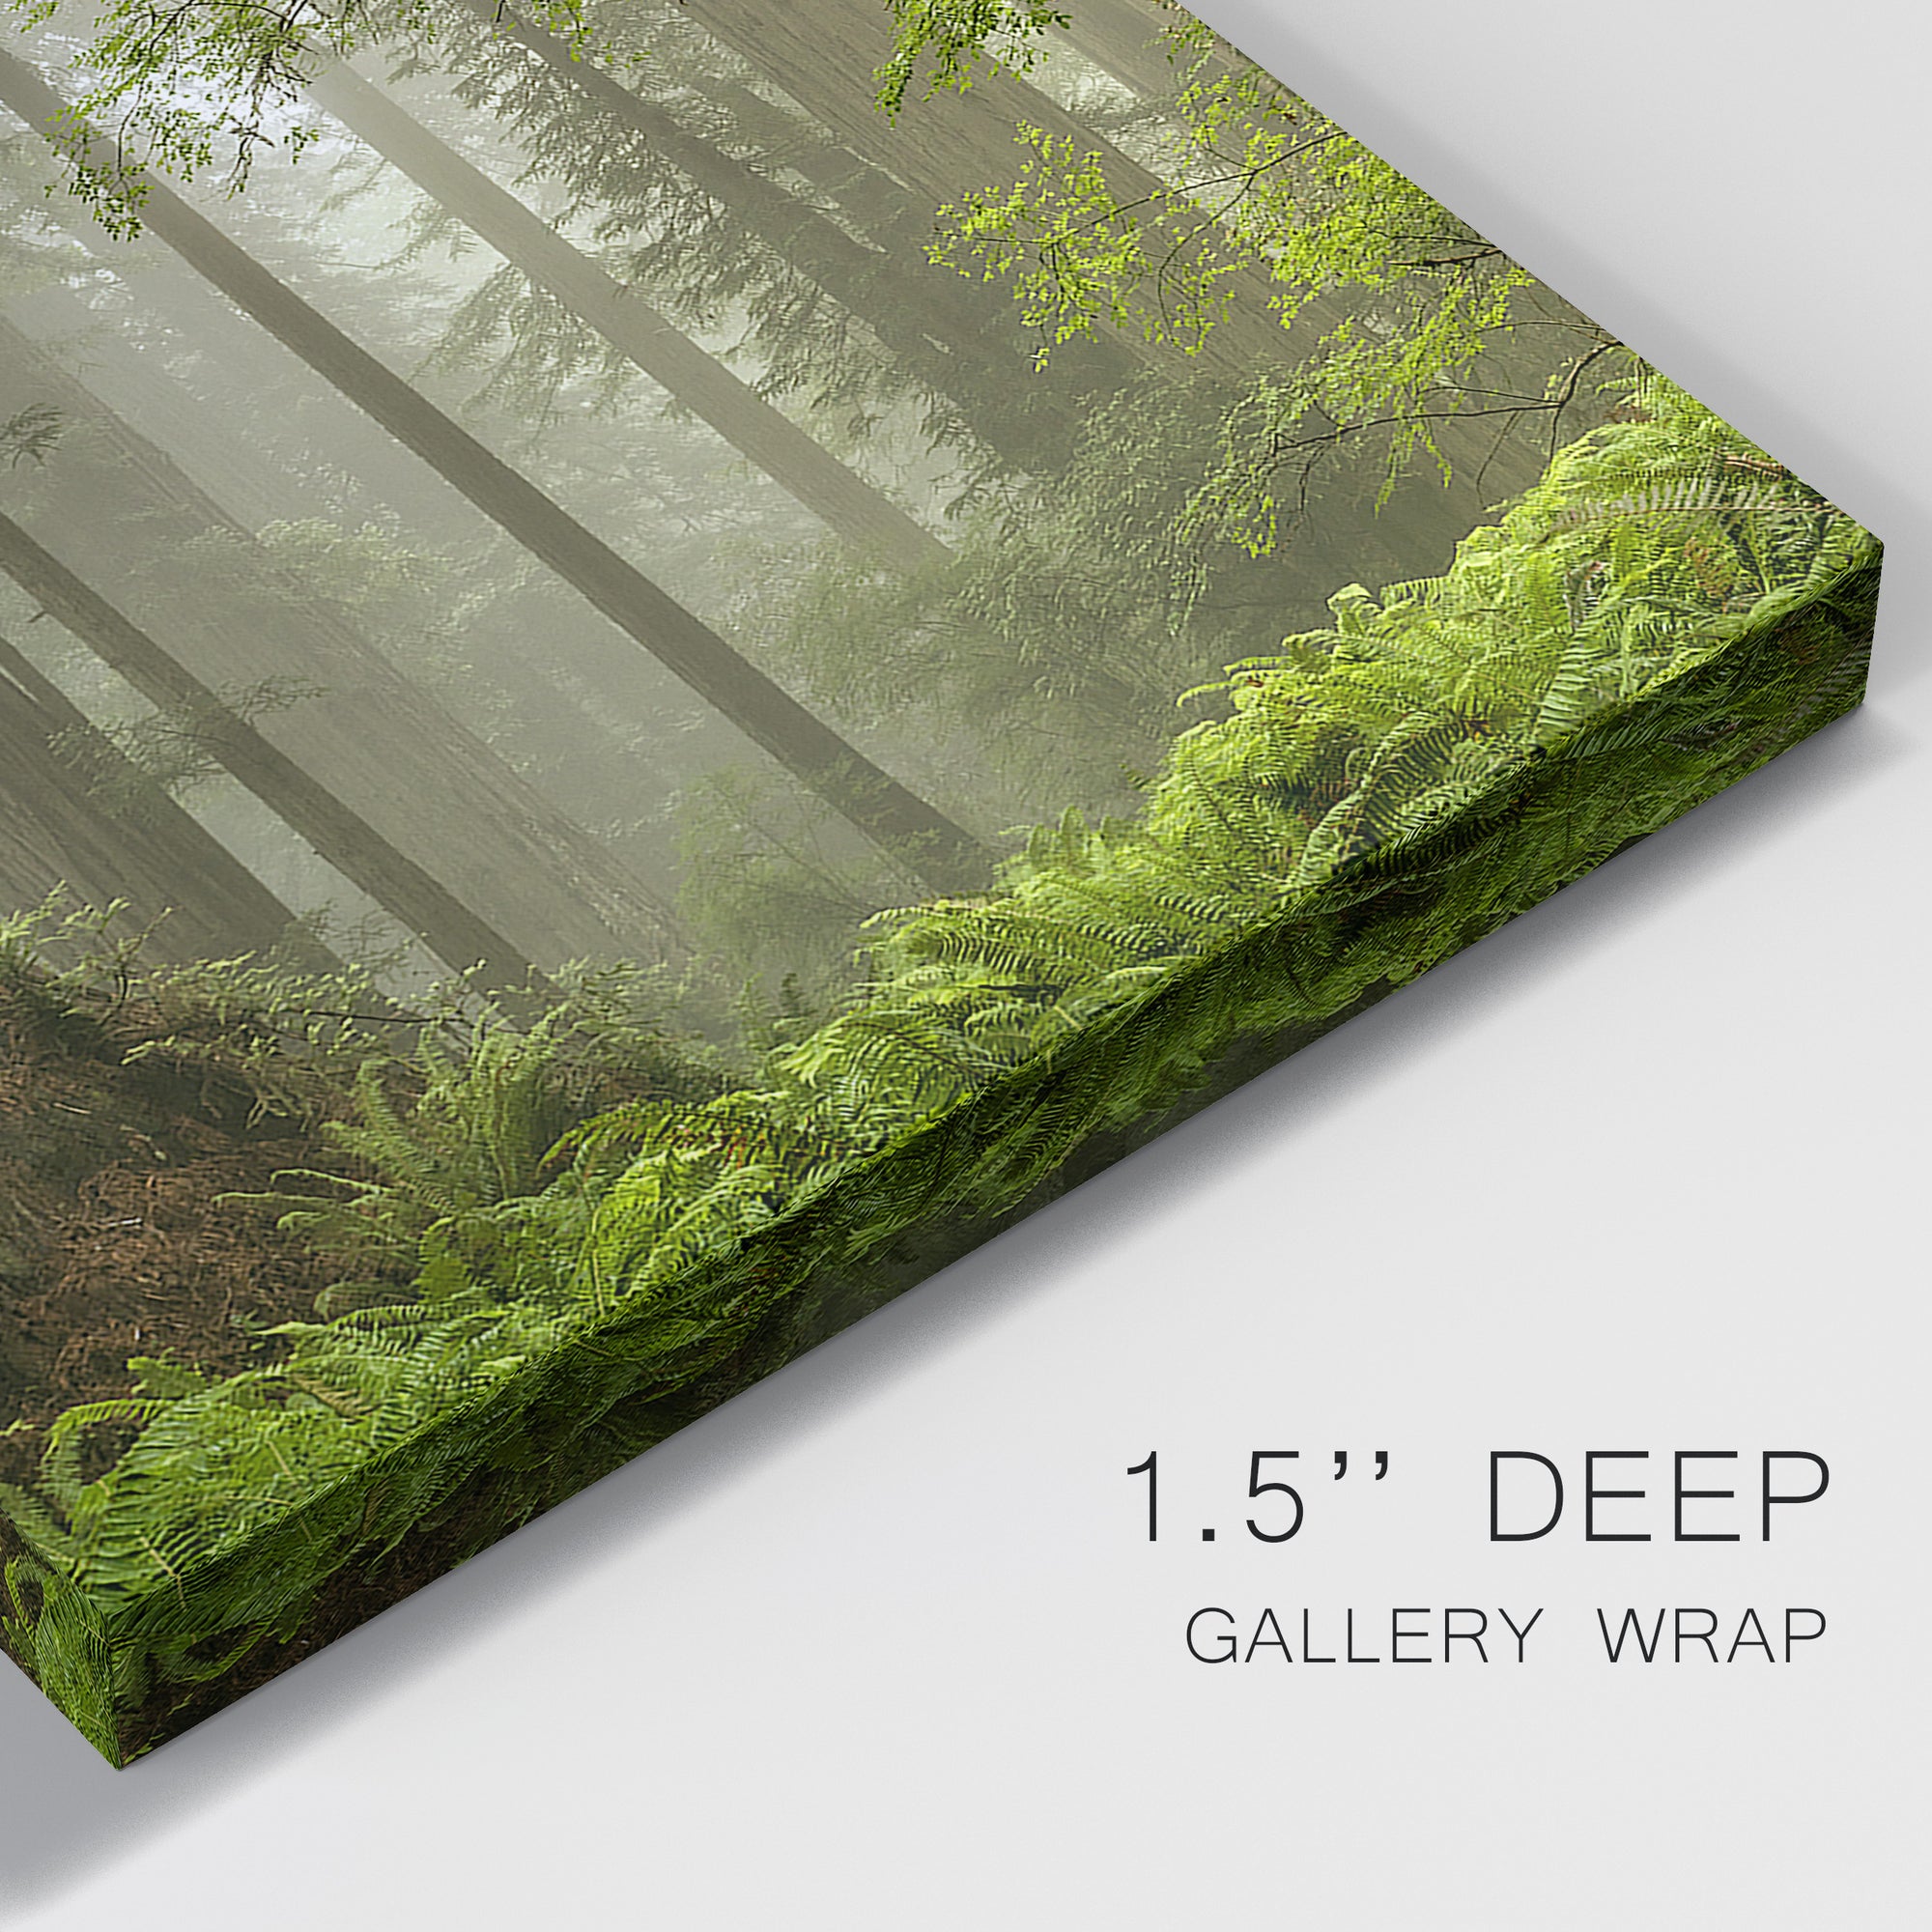 Summer Forest II Premium Gallery Wrapped Canvas - Ready to Hang